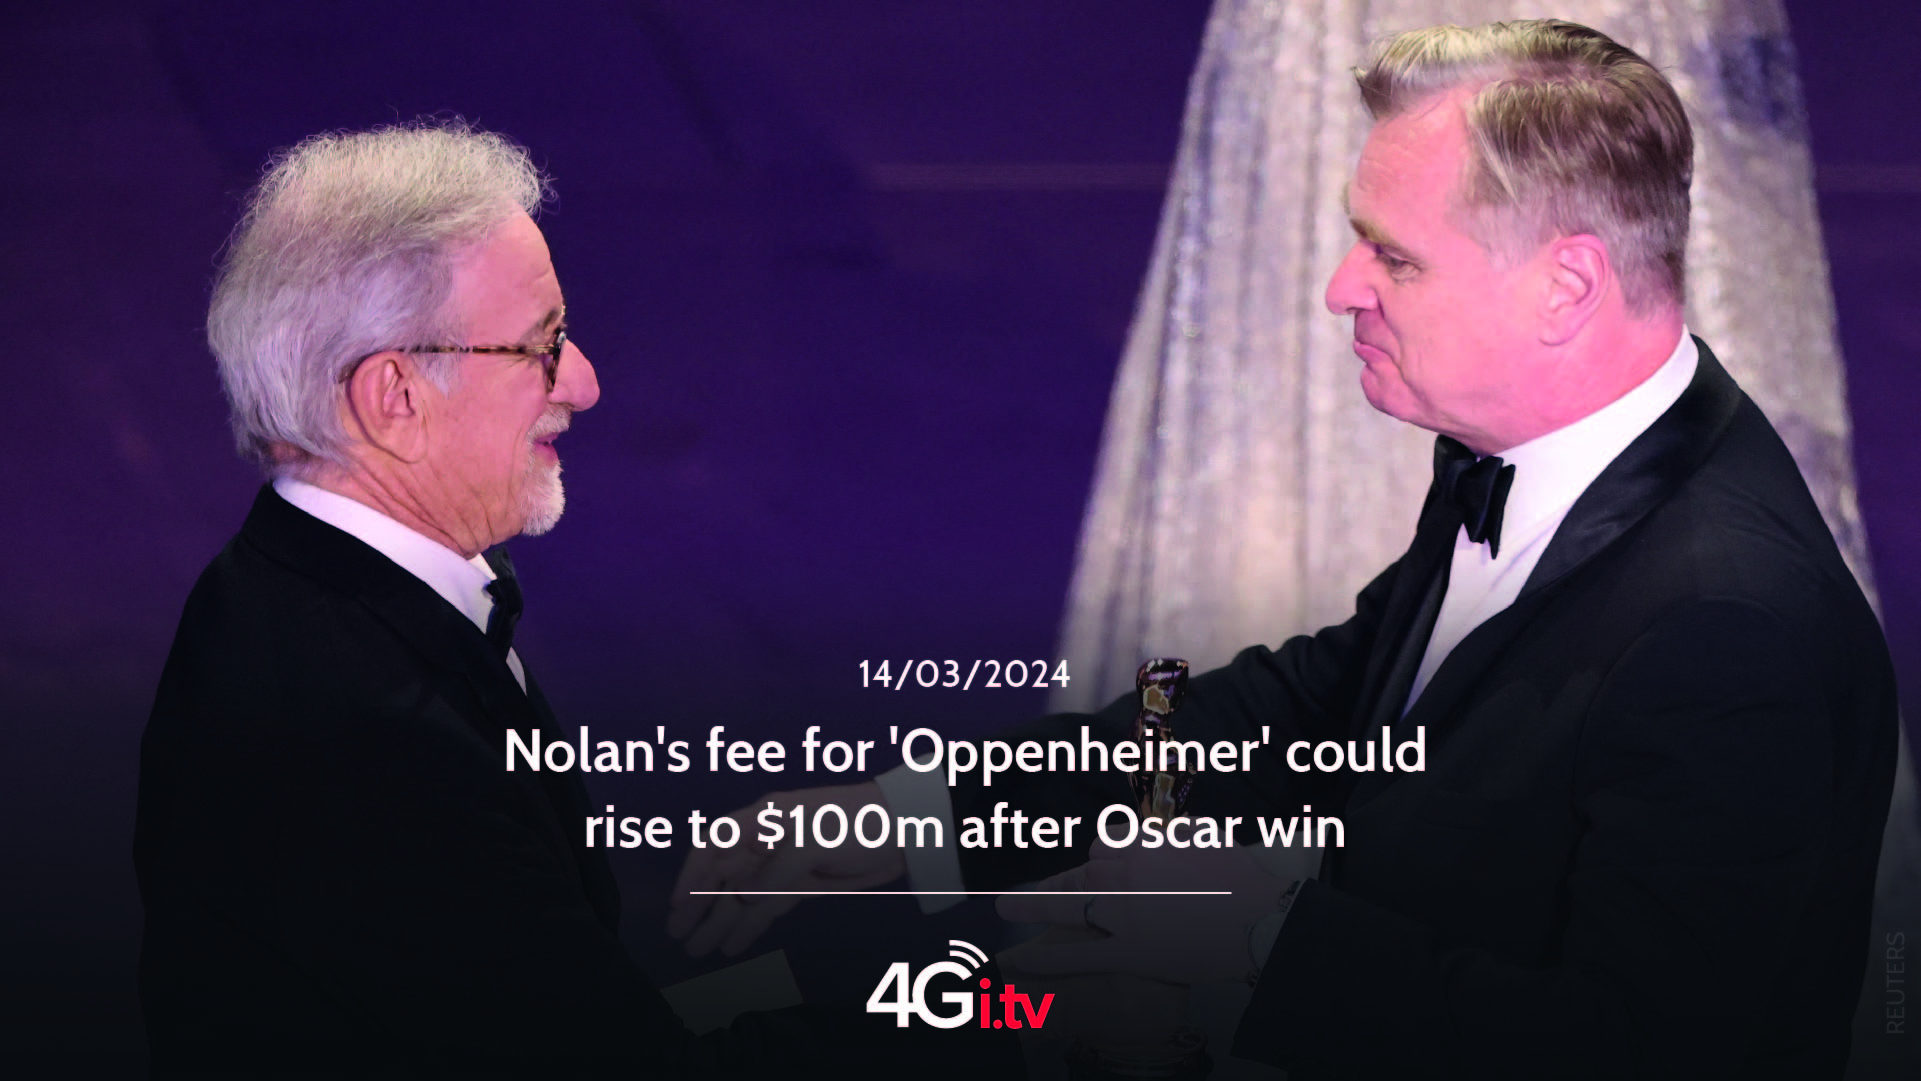 Подробнее о статье Nolan’s fee for ‘Oppenheimer’ could rise to $100m after Oscar win